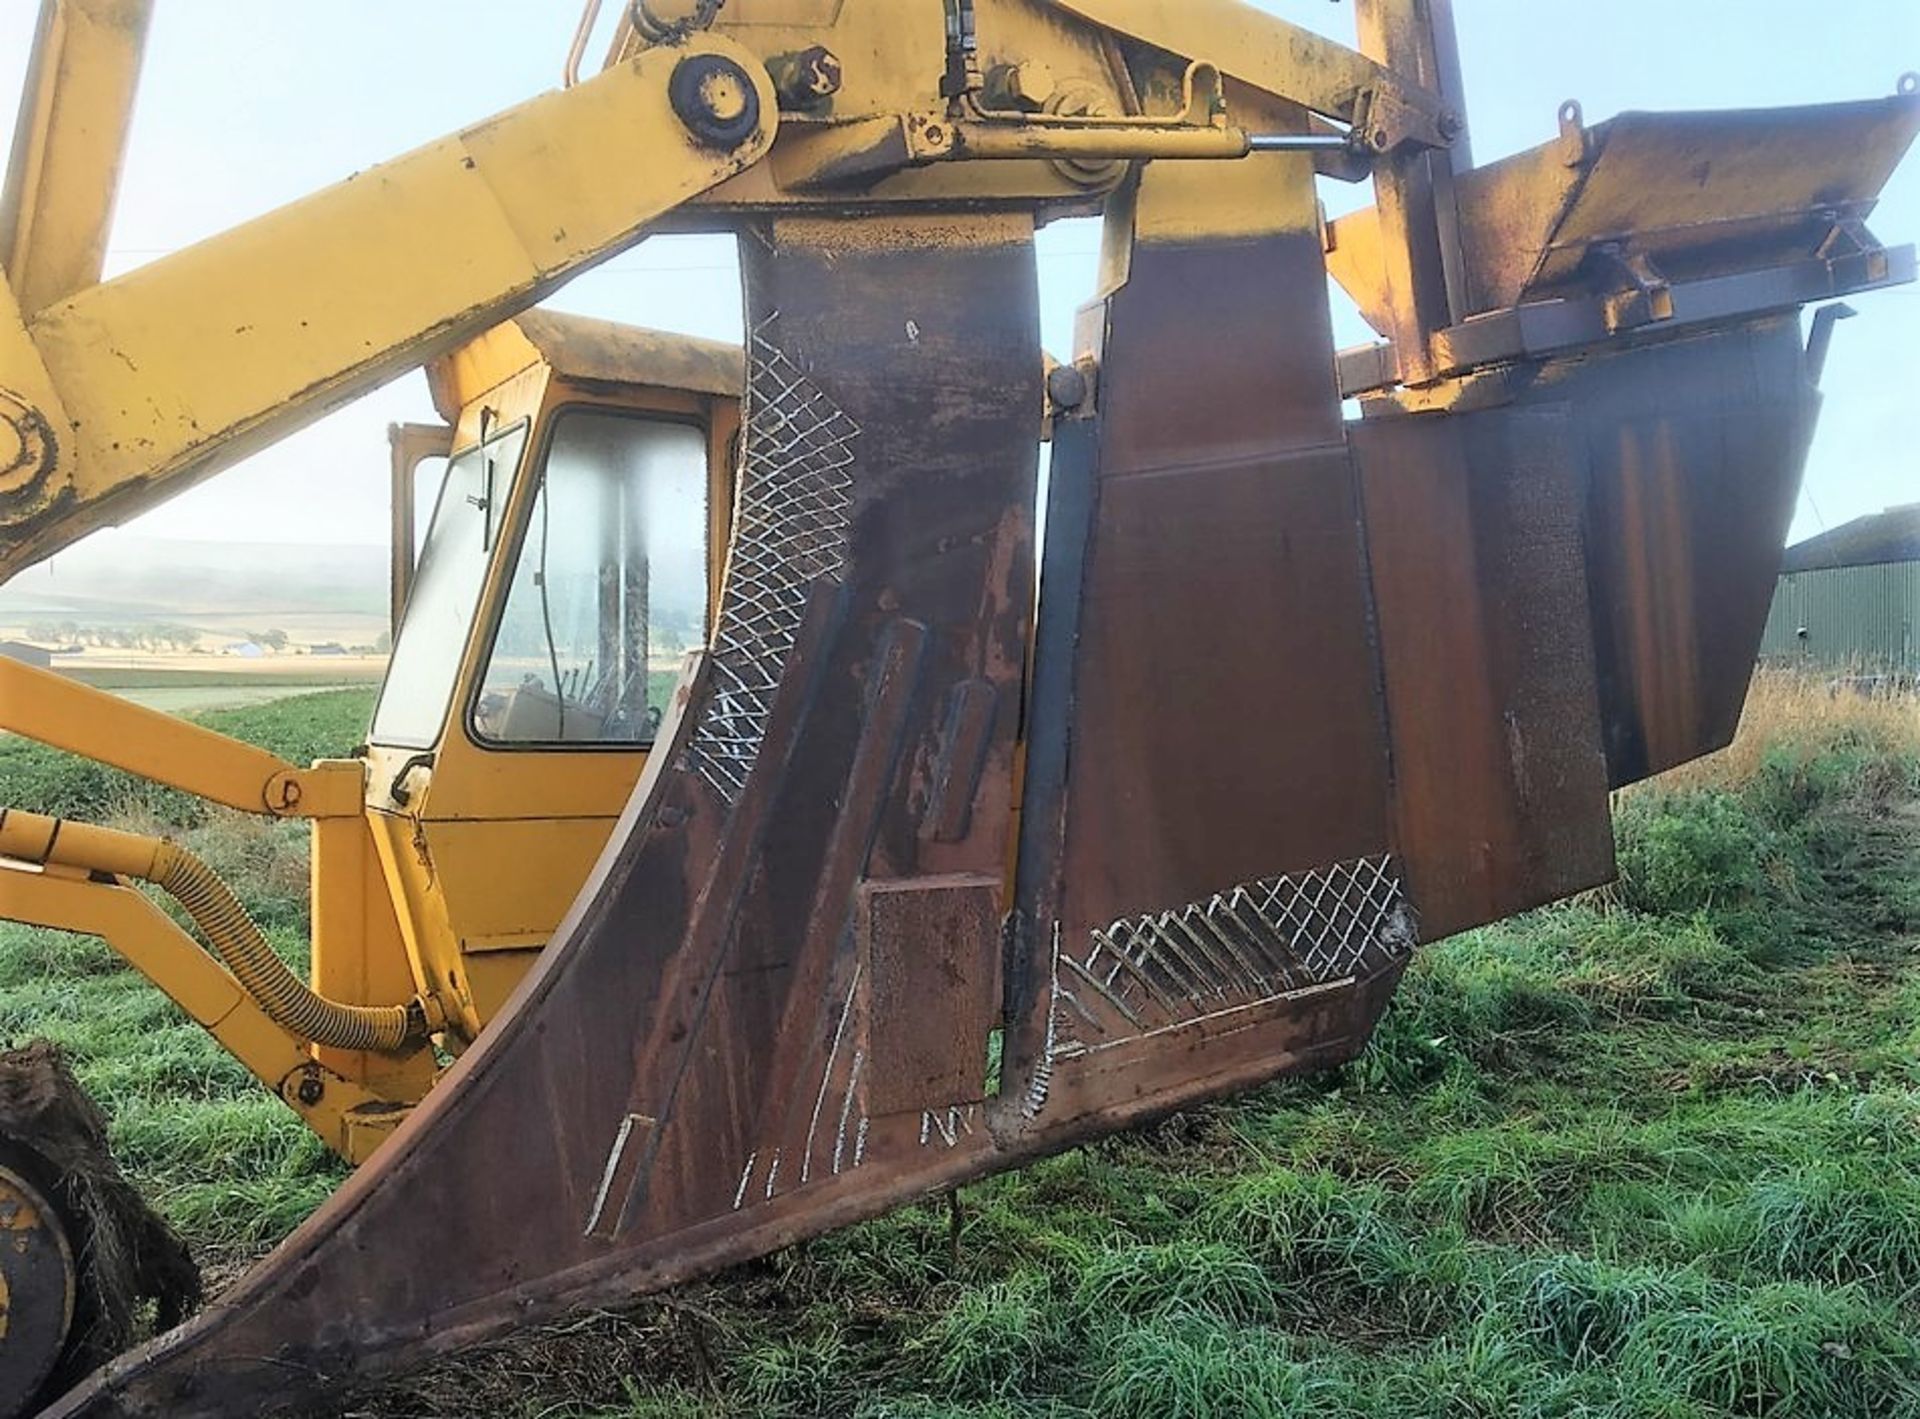 1984 INTER-DRAIN LTD Trenchless. Model 2032GP. S/N D84051. Tracked trencher. Trimble laser control s - Image 14 of 30